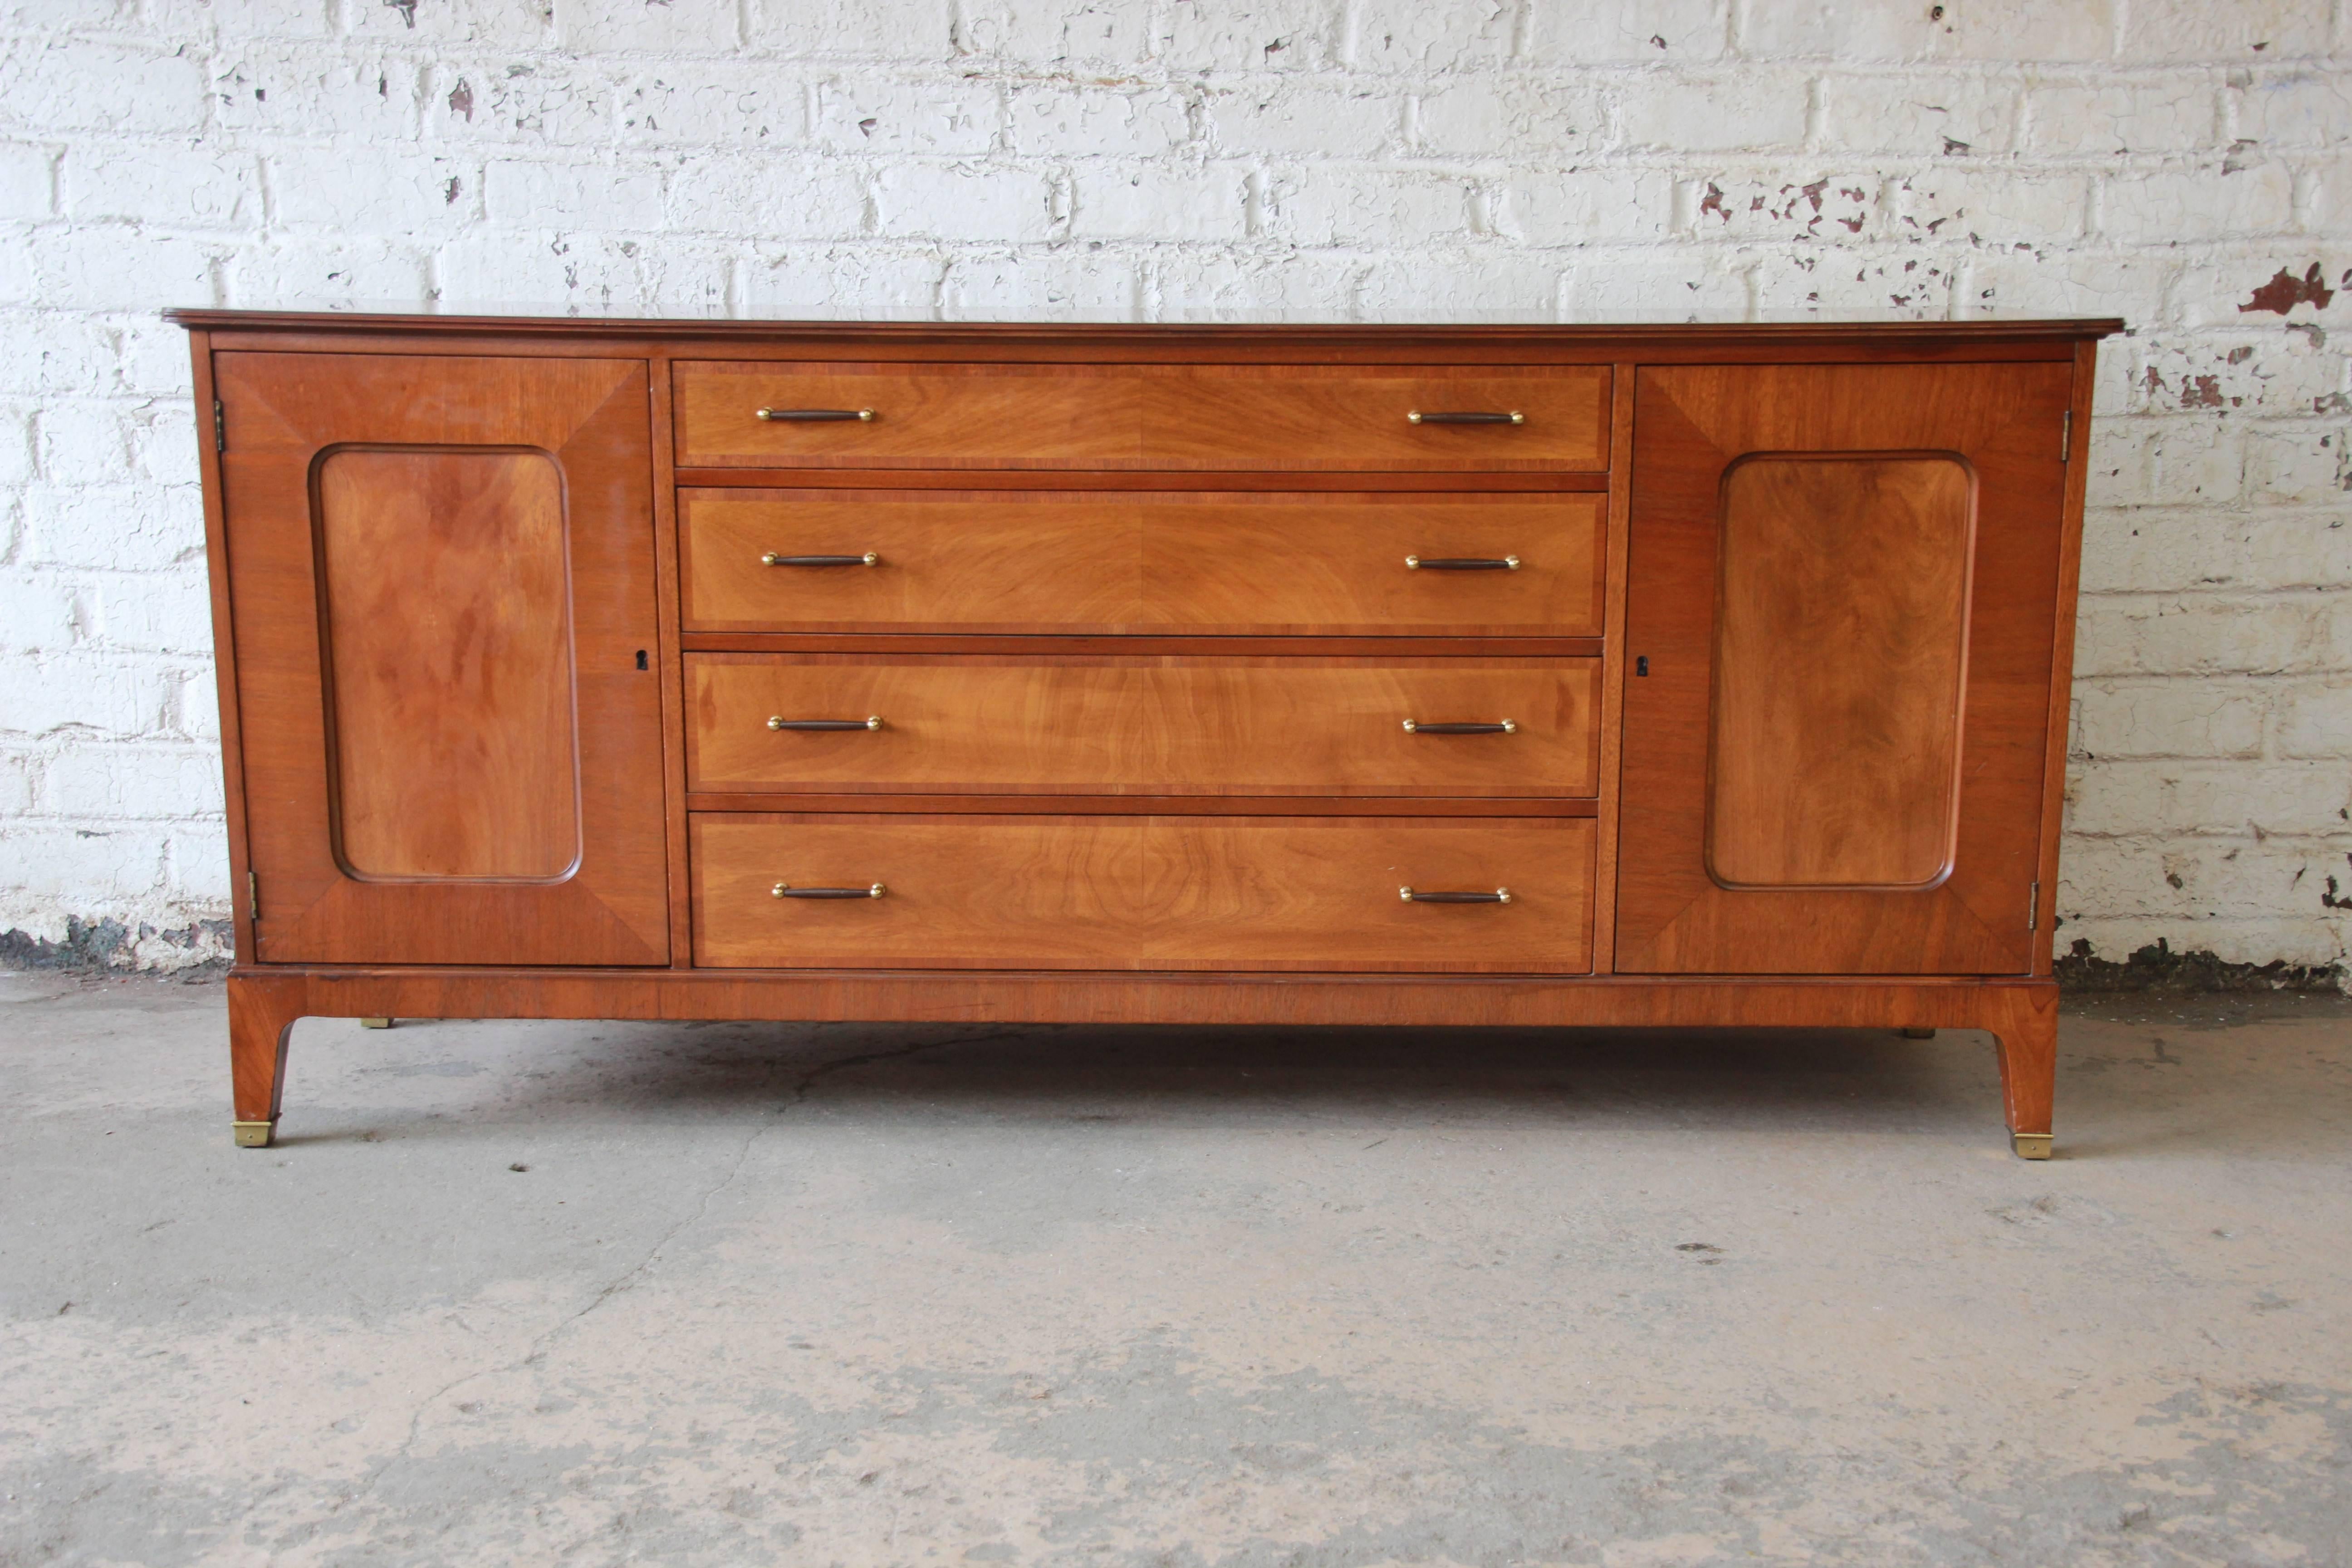 Mid-20th Century Renzo Rutili for Johnson Mid-Century Modern Sideboard Credenza with Hutch Top